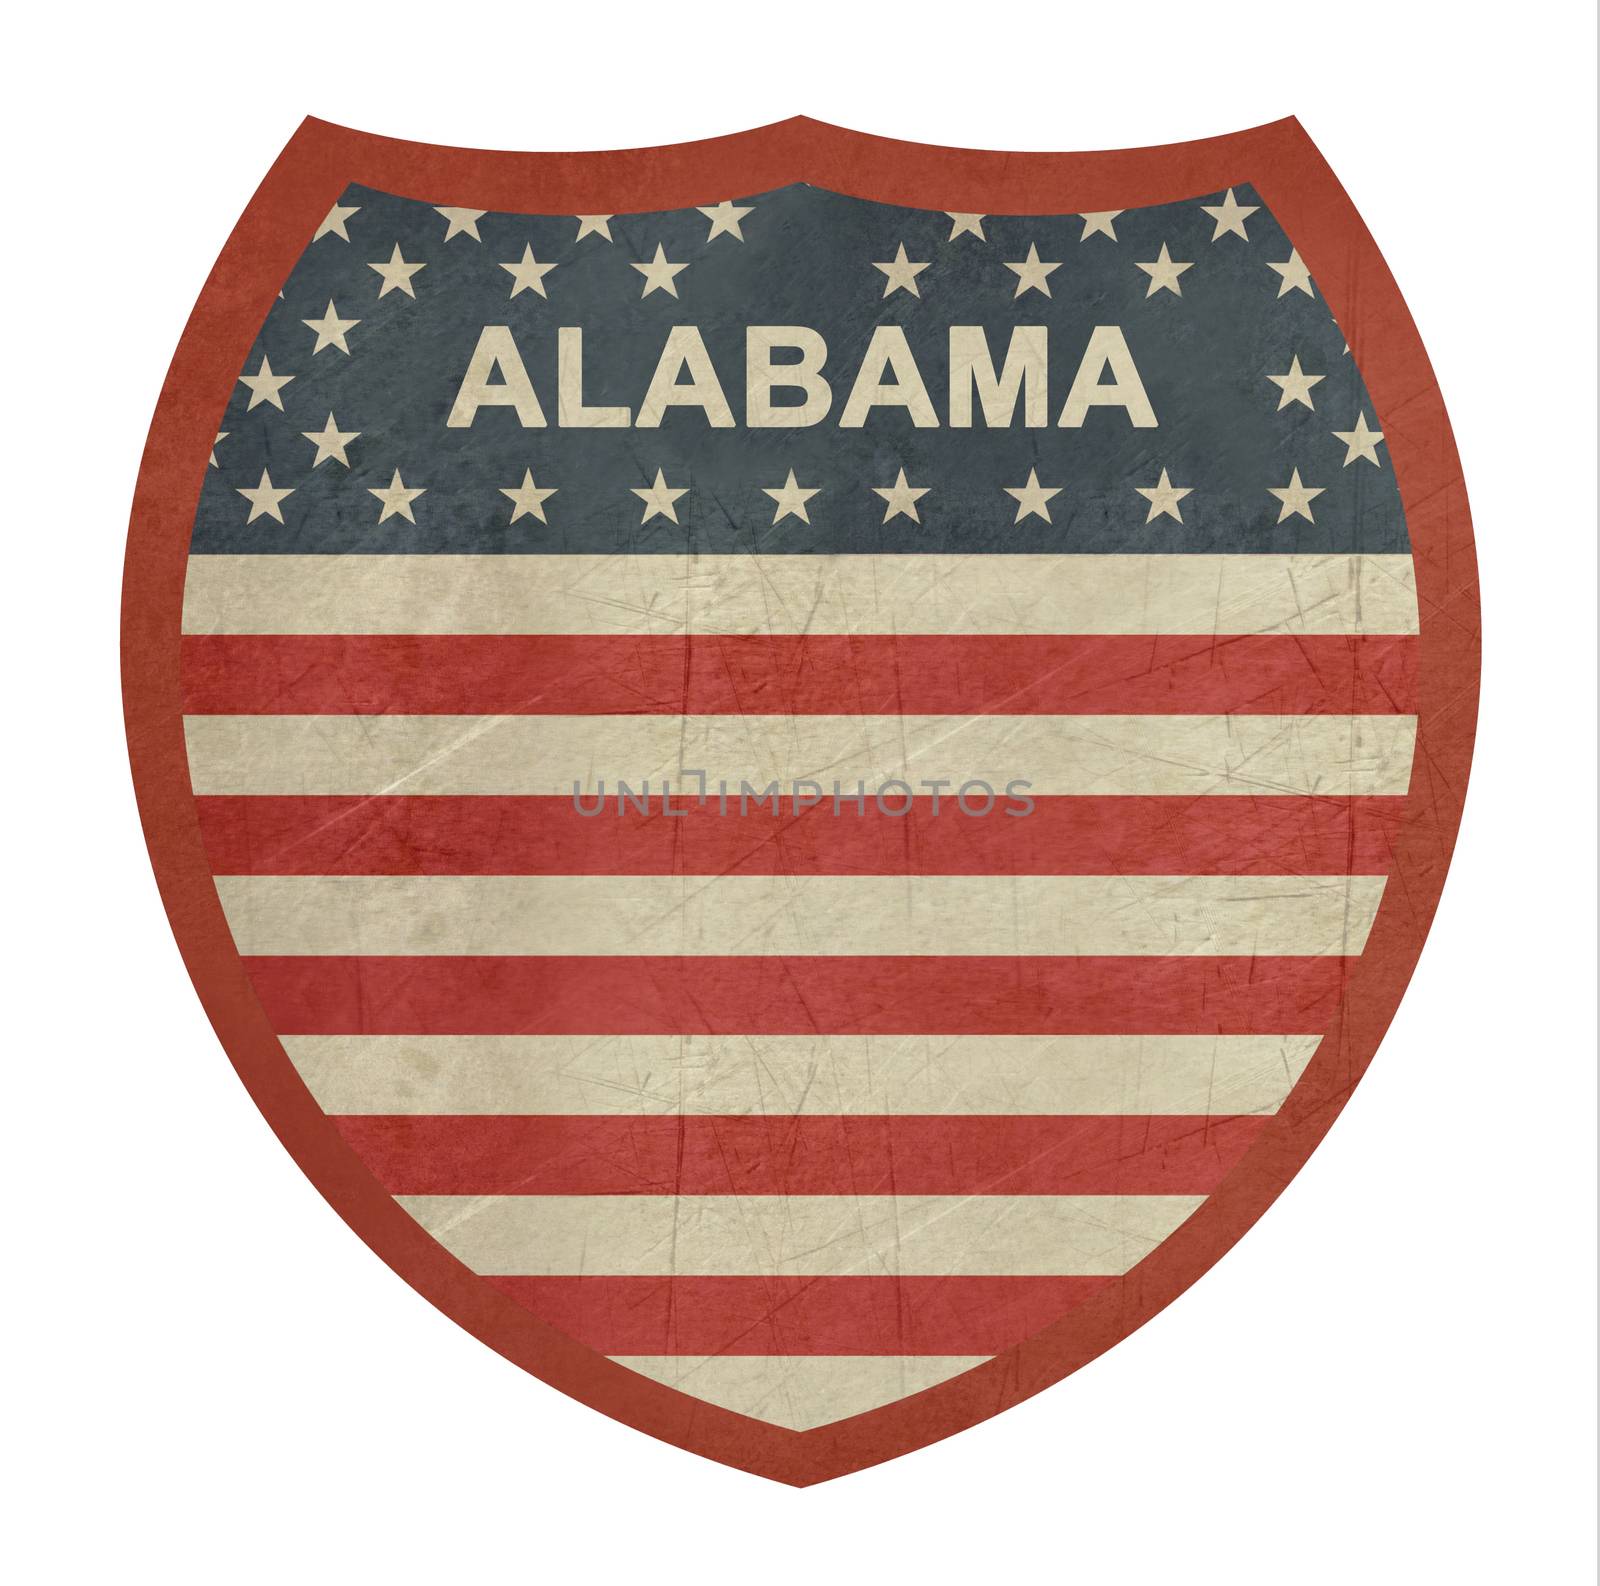 Grunge Alabama American interstate highway sign isolated on a white background.